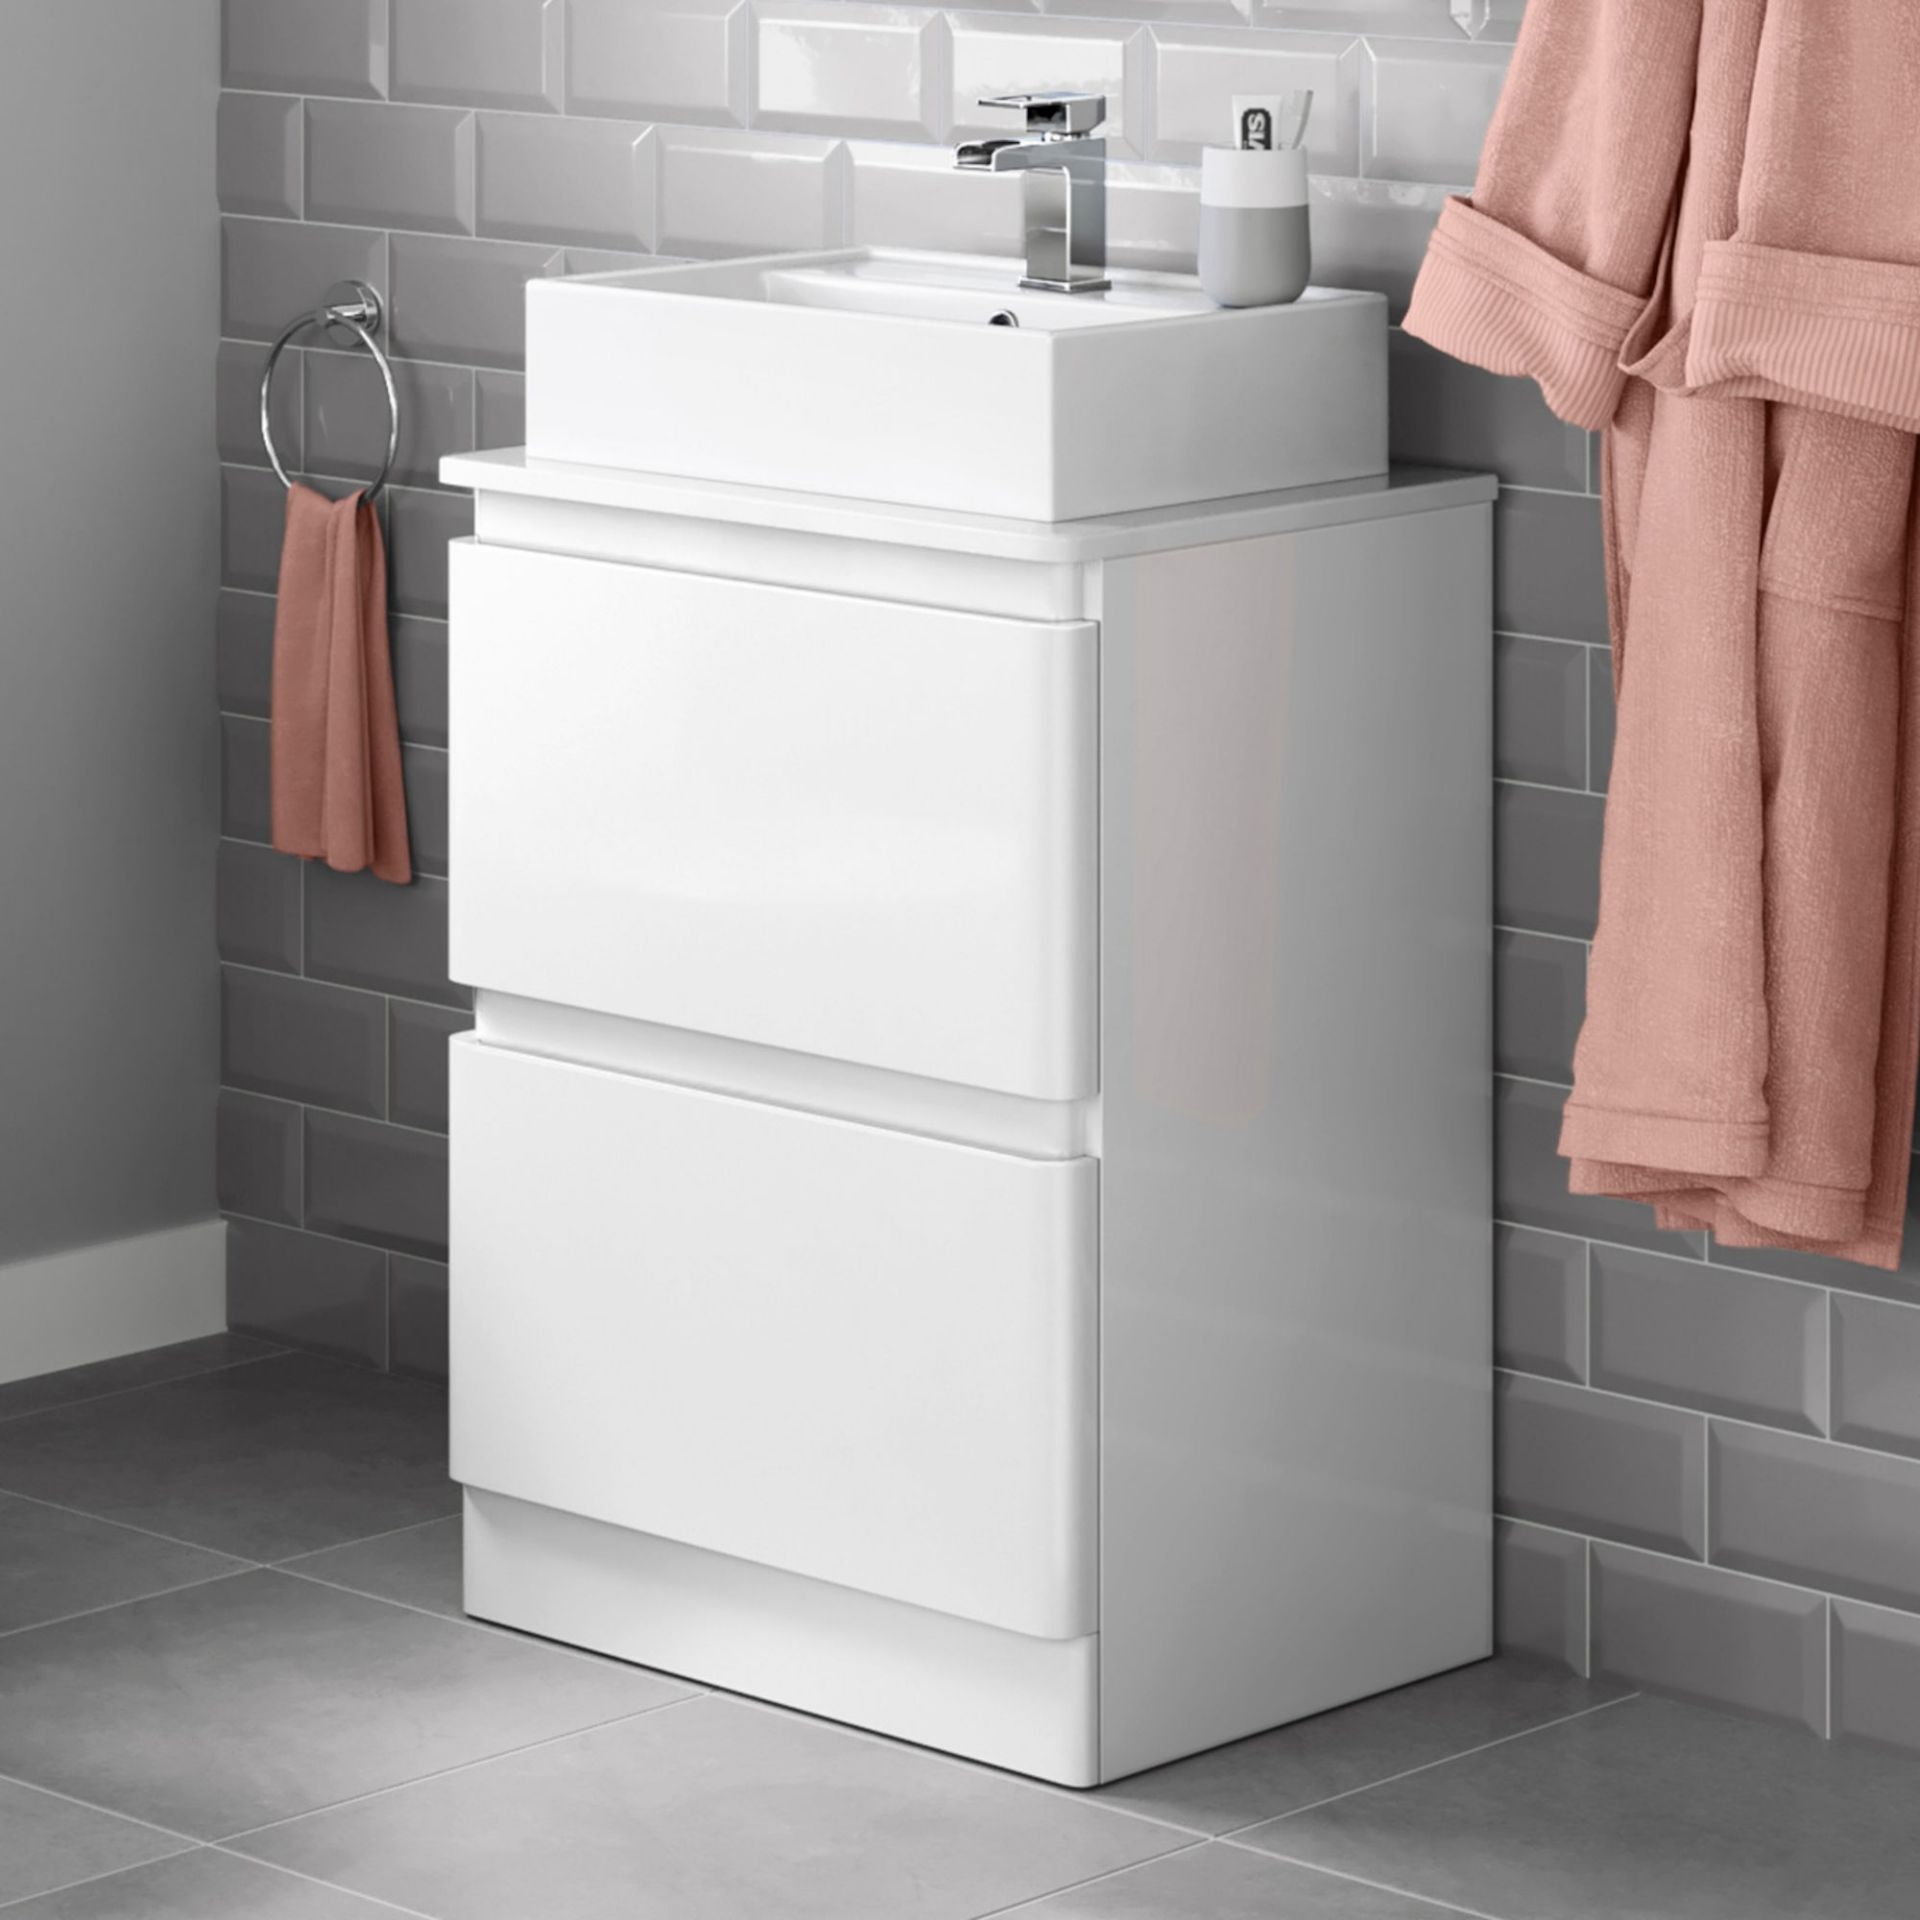 (AD50) 600mm Denver Gloss White Countertop Unit and Elisa Basin - Floor Standing. RRP £499.99. Comes